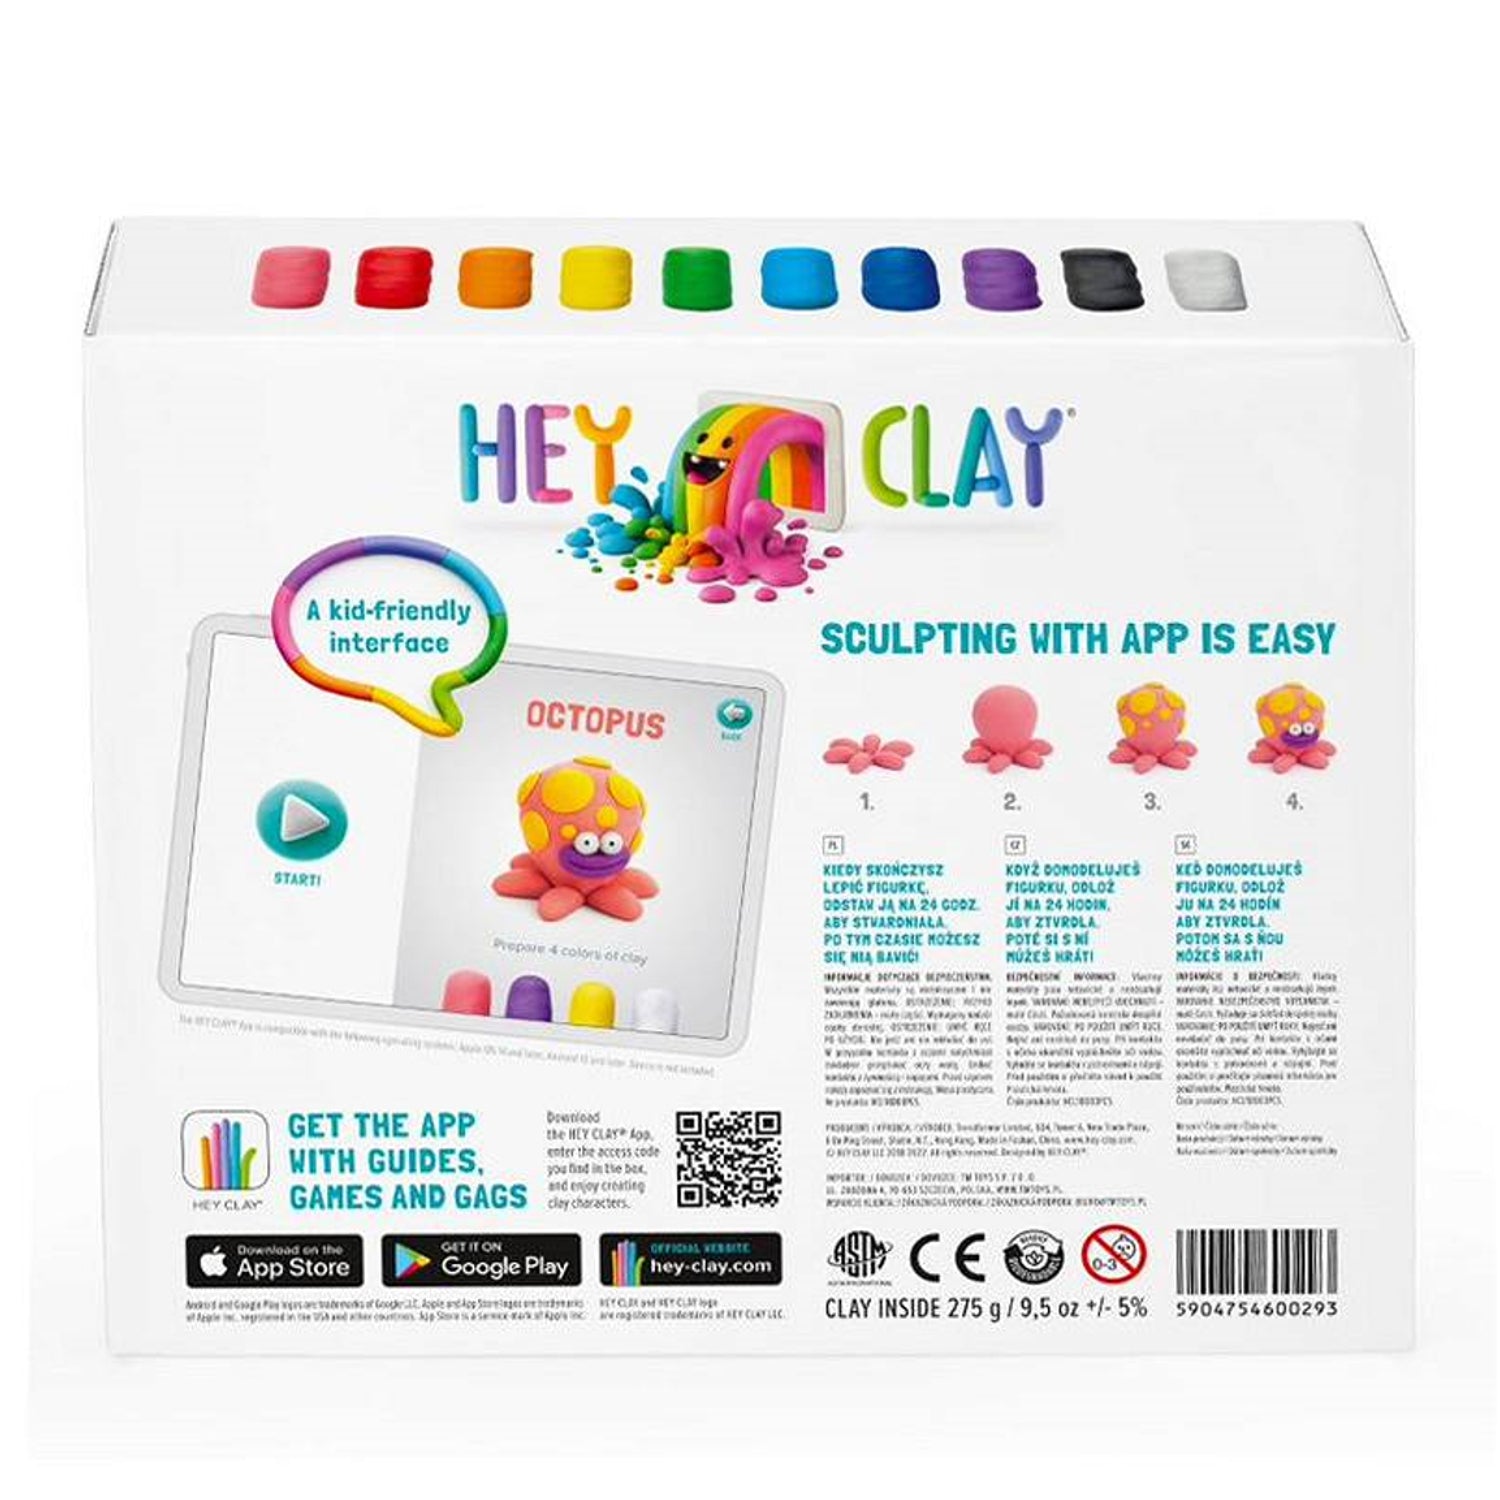 HEY CLAY Ocean: Shark, Octopus, Stingray Set - Air Dry Clay Kit 6 cans and  Sculpting Tools with Fun Interactive Instructions App